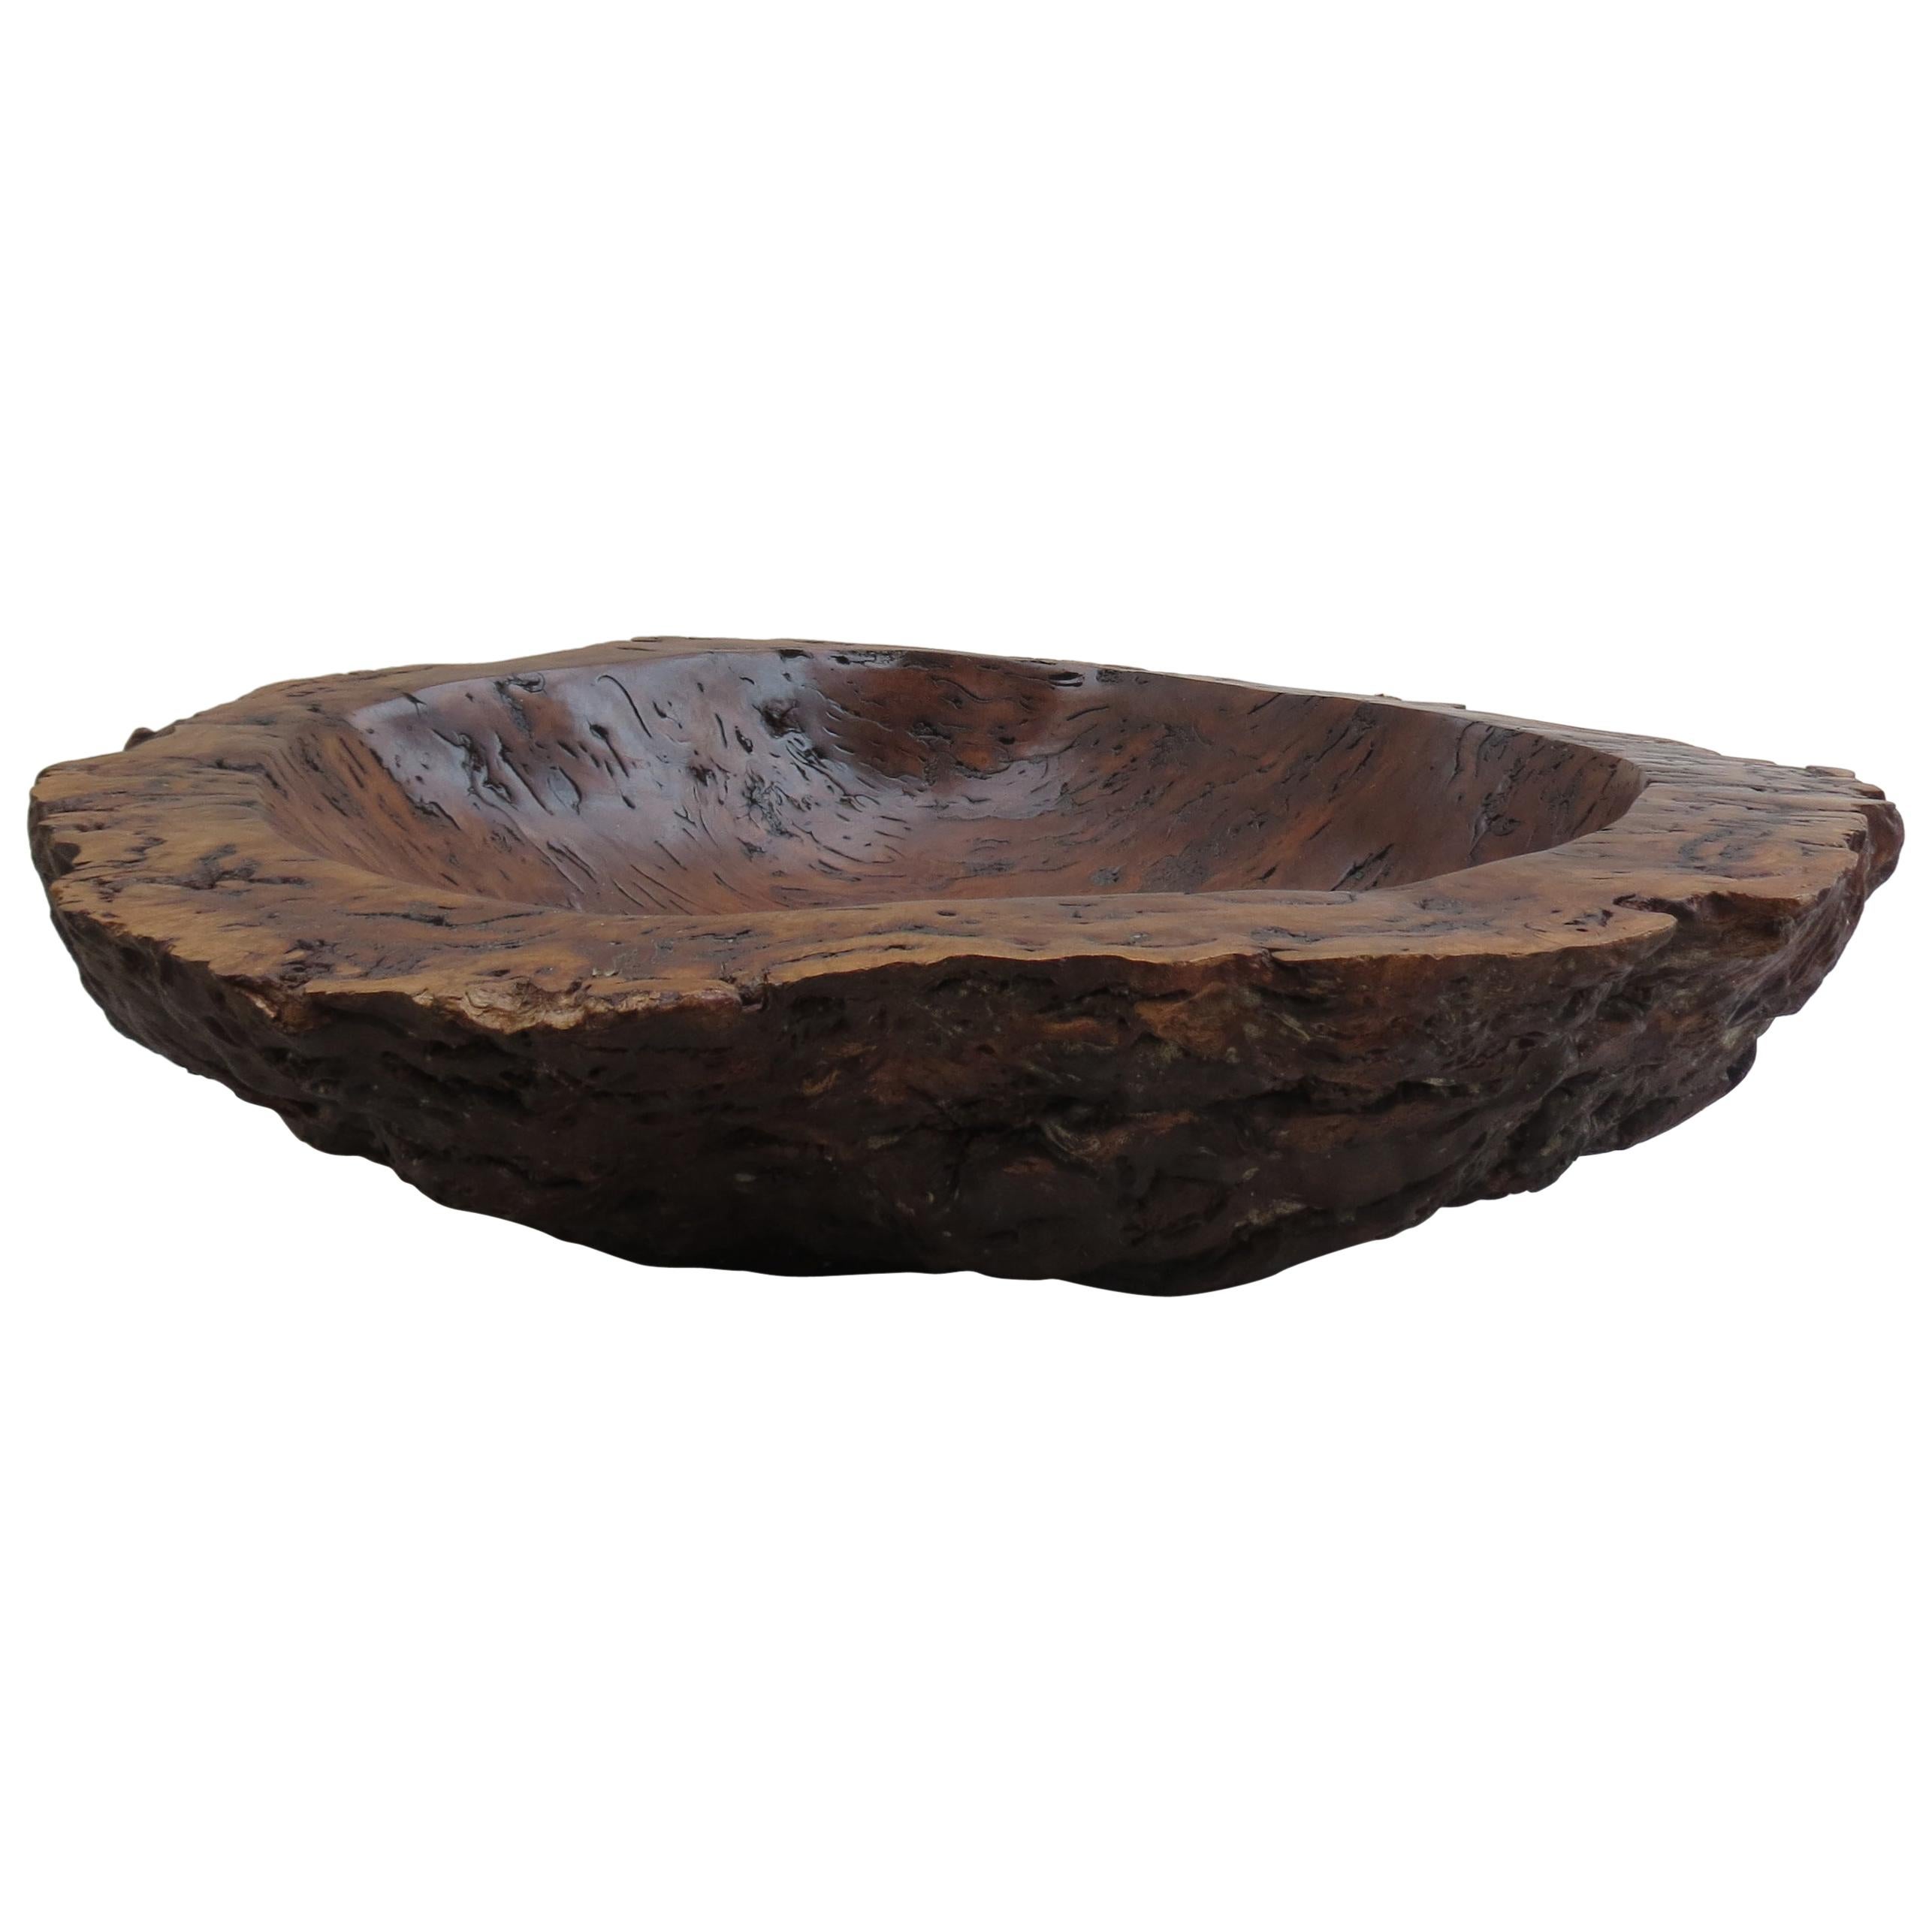 A very large and heavy hand produced bowl, made from one piece of solid river red gum burr. Originates from Australia. Very well produced and exceptionally good quality. Wonderful texture and grain. 

ST1122.








  